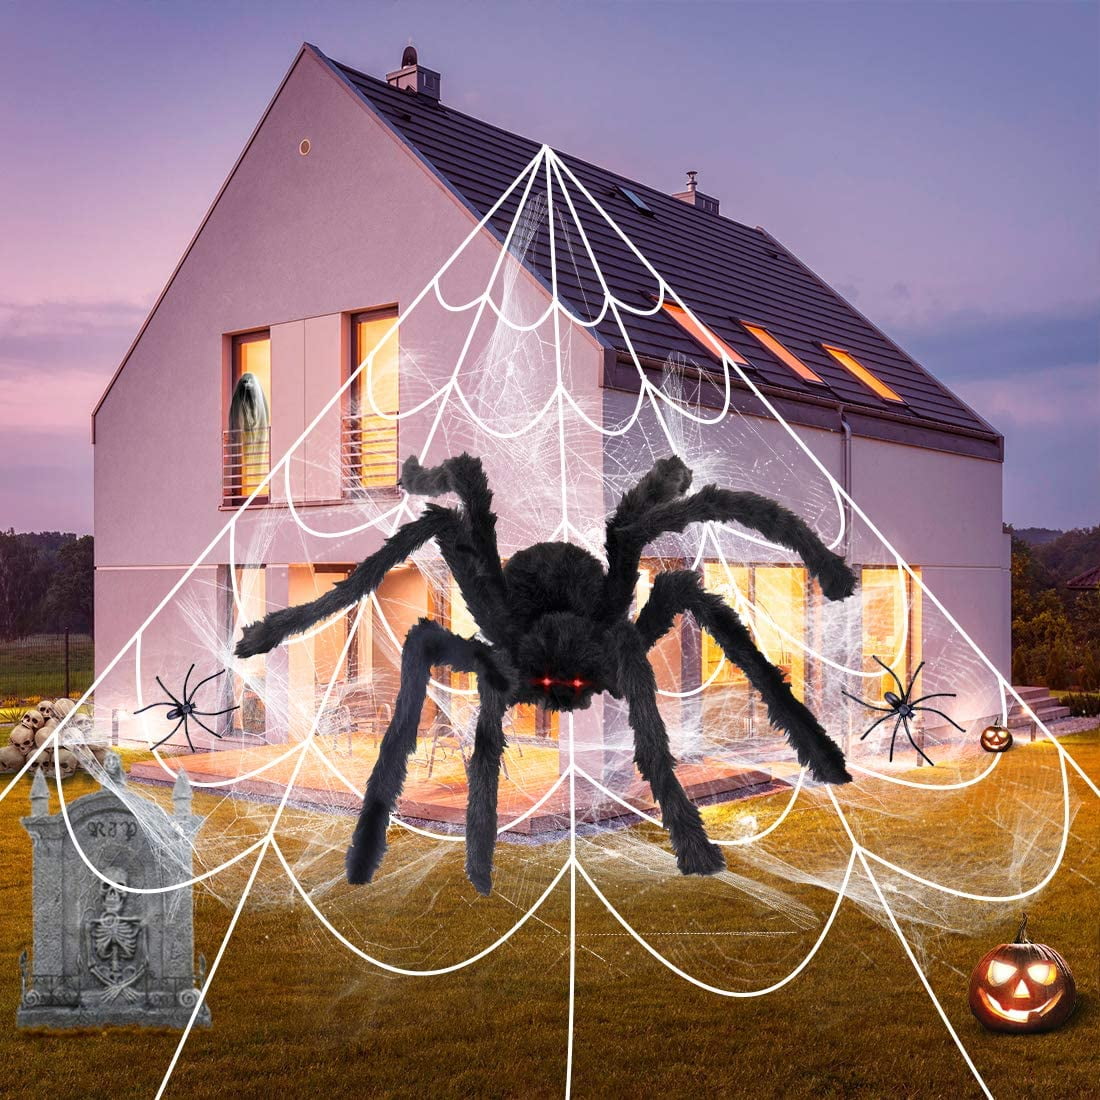 Details about   Stretchy Spider Web Cobweb With 2 Spiders Halloween Party Props Decoration New 